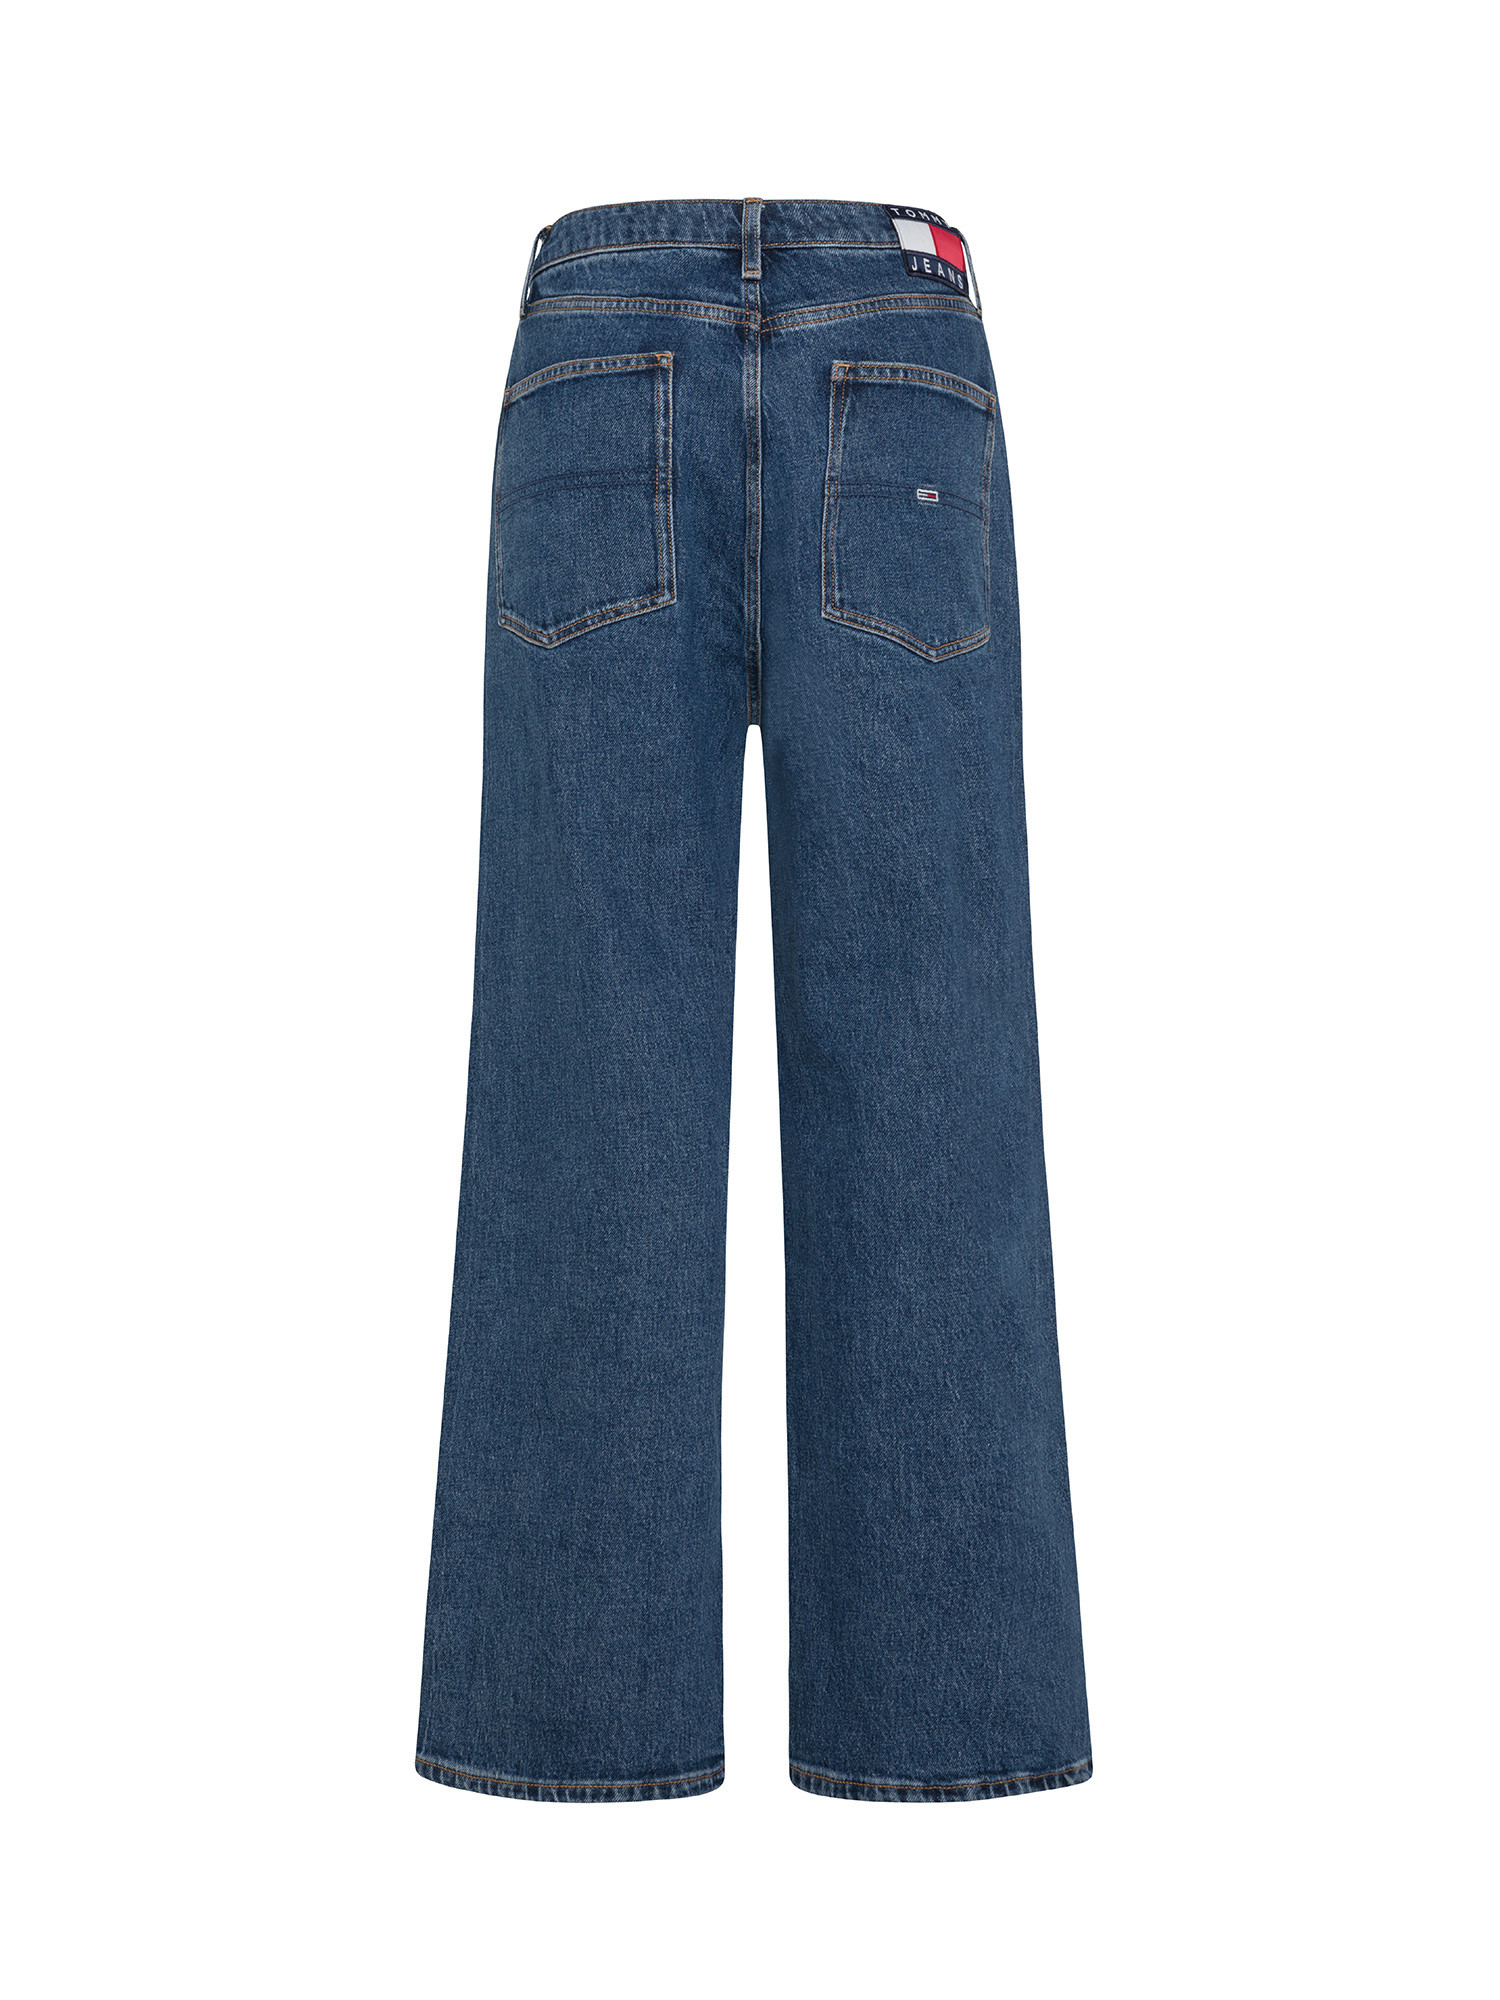 Tommy Jeans - Low rise baggy jeans, Denim, large image number 1